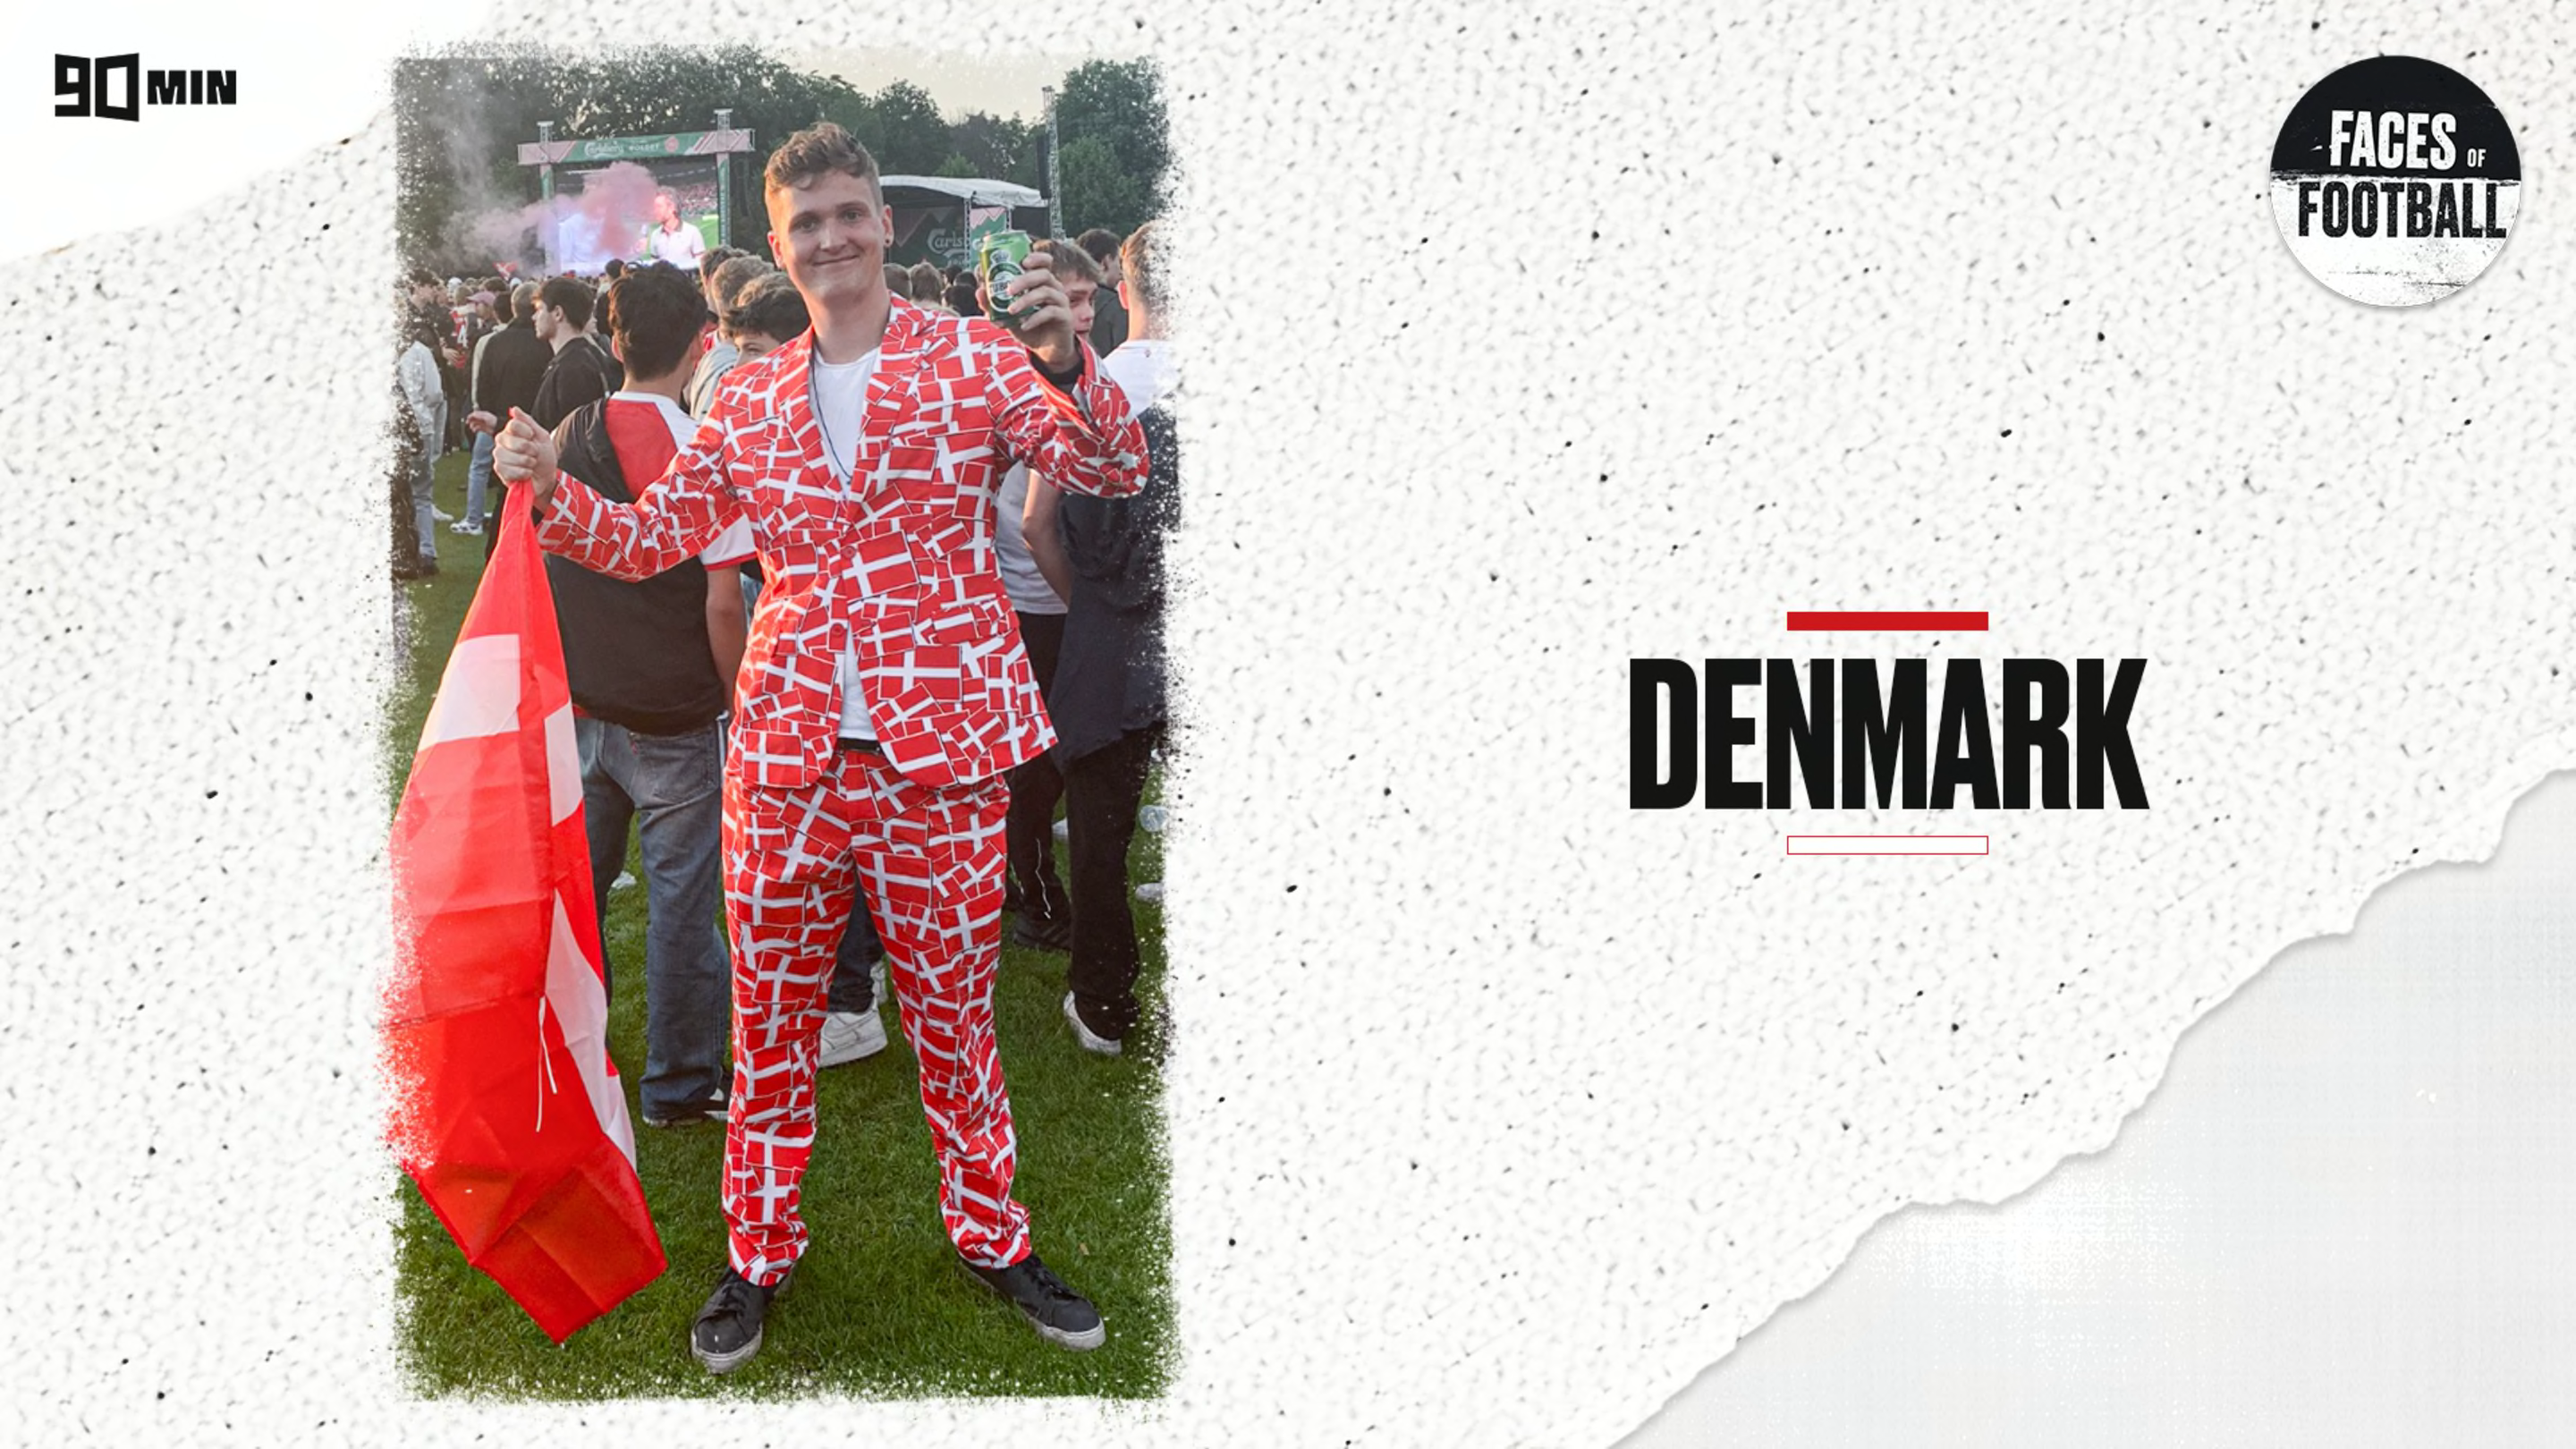 Faces of Football: Denmark - a letter to the national team